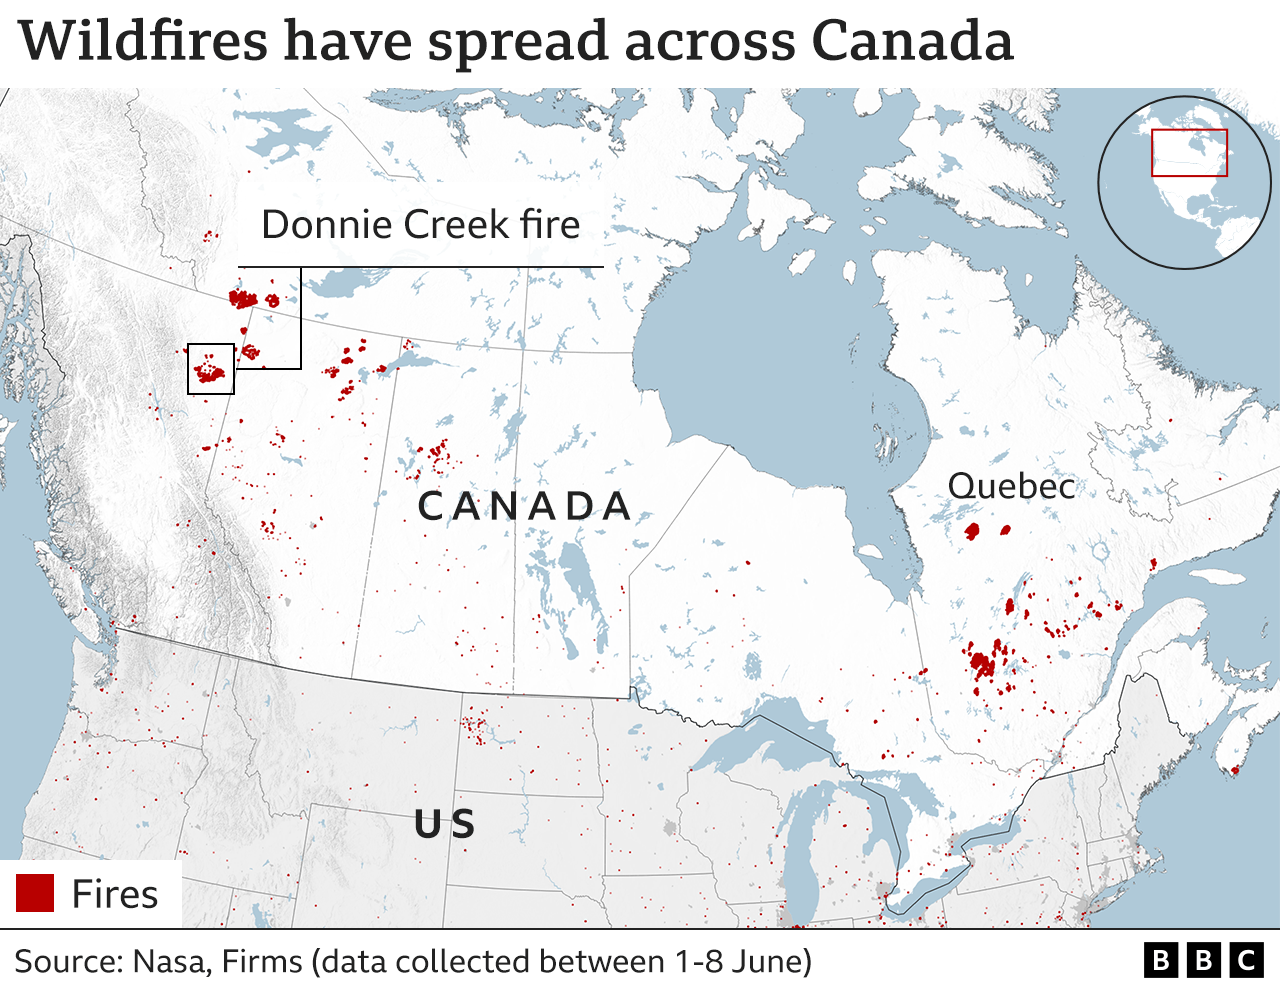  130046179 Wildfires Have Spread Across Canada V3 640 Nc 2x Nc 